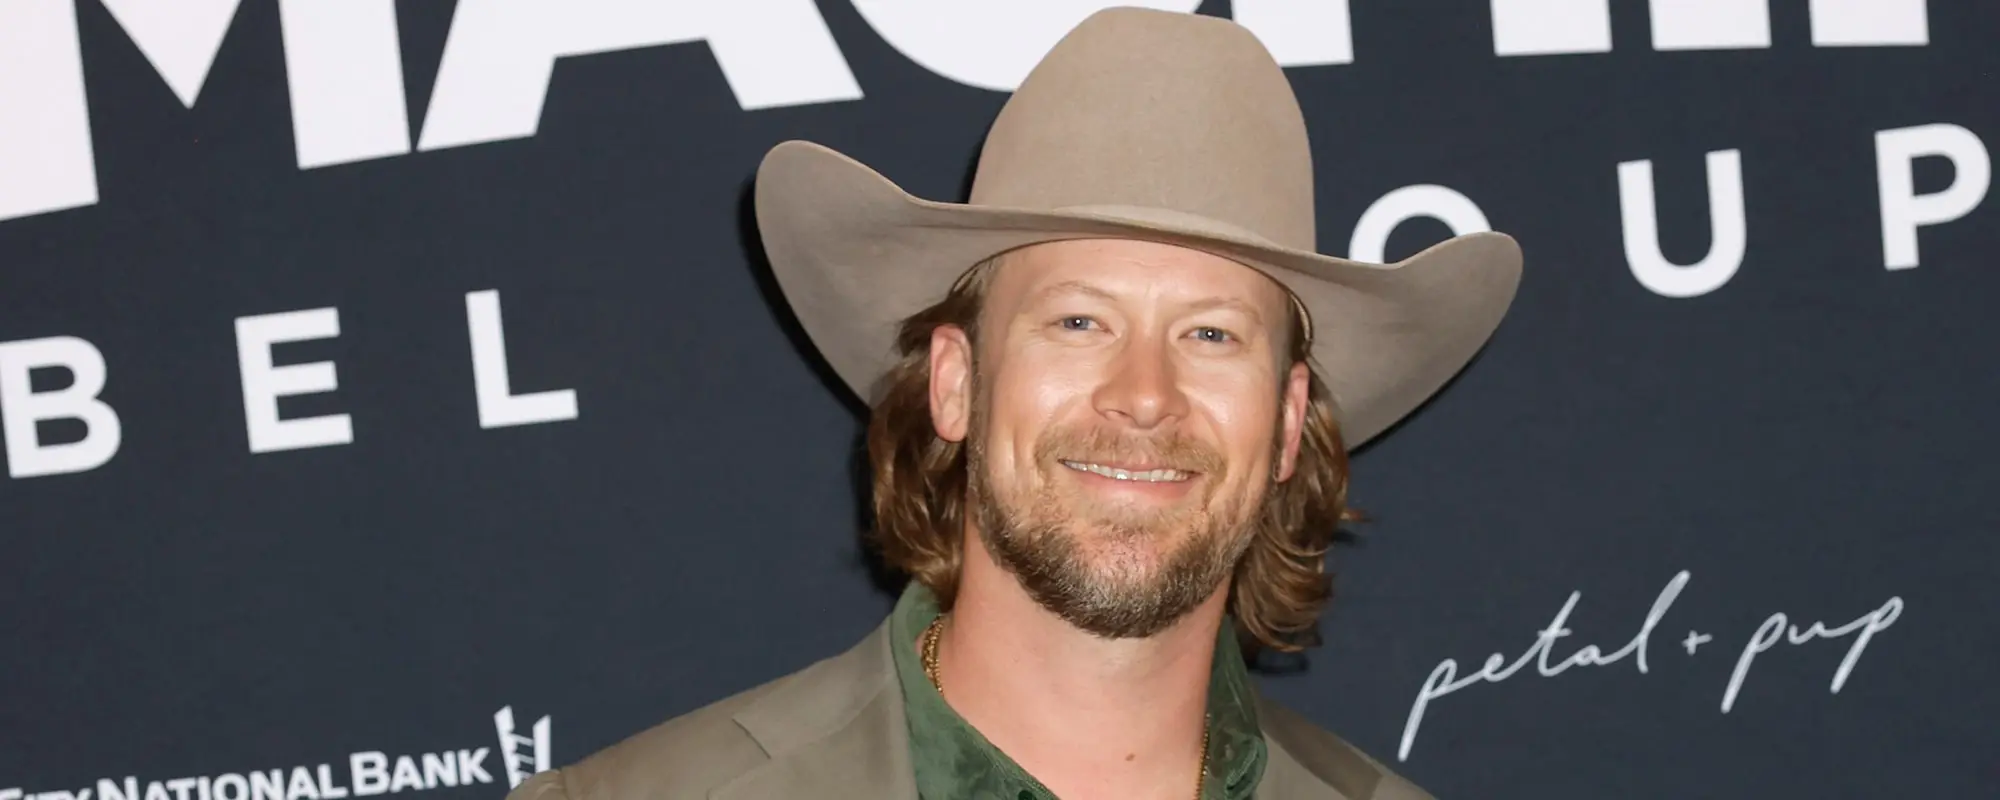 Brian Kelley Reveals the Personal Inspiration Behind His Rumored Tyler Hubbard Diss Track “Kiss My Boots”